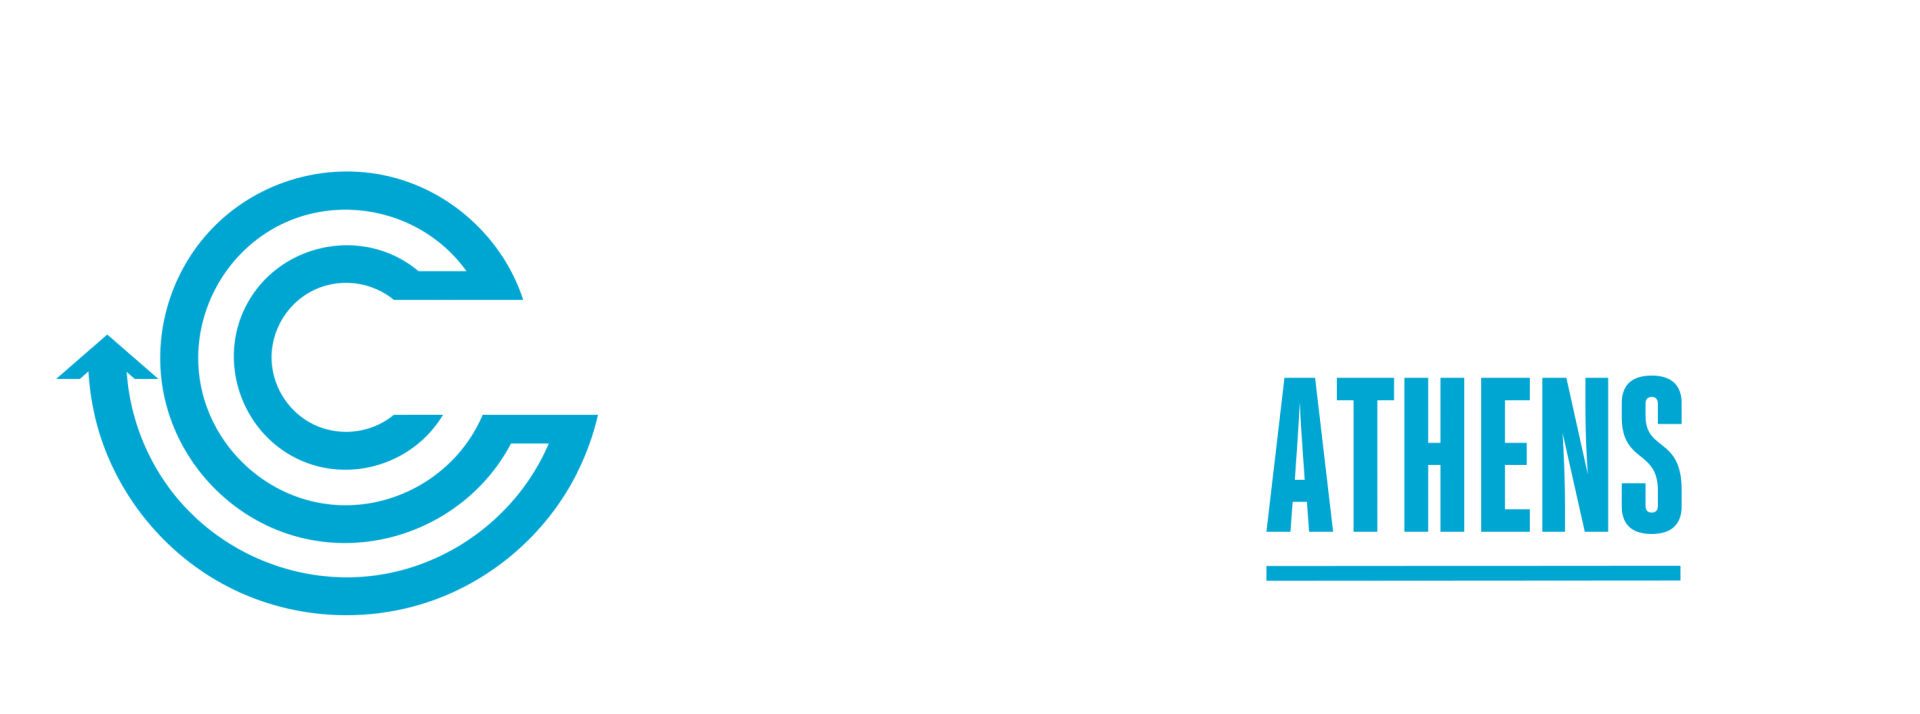 Cornerstone Church Athens - One of the Friendliest Churches in Athens, Ga